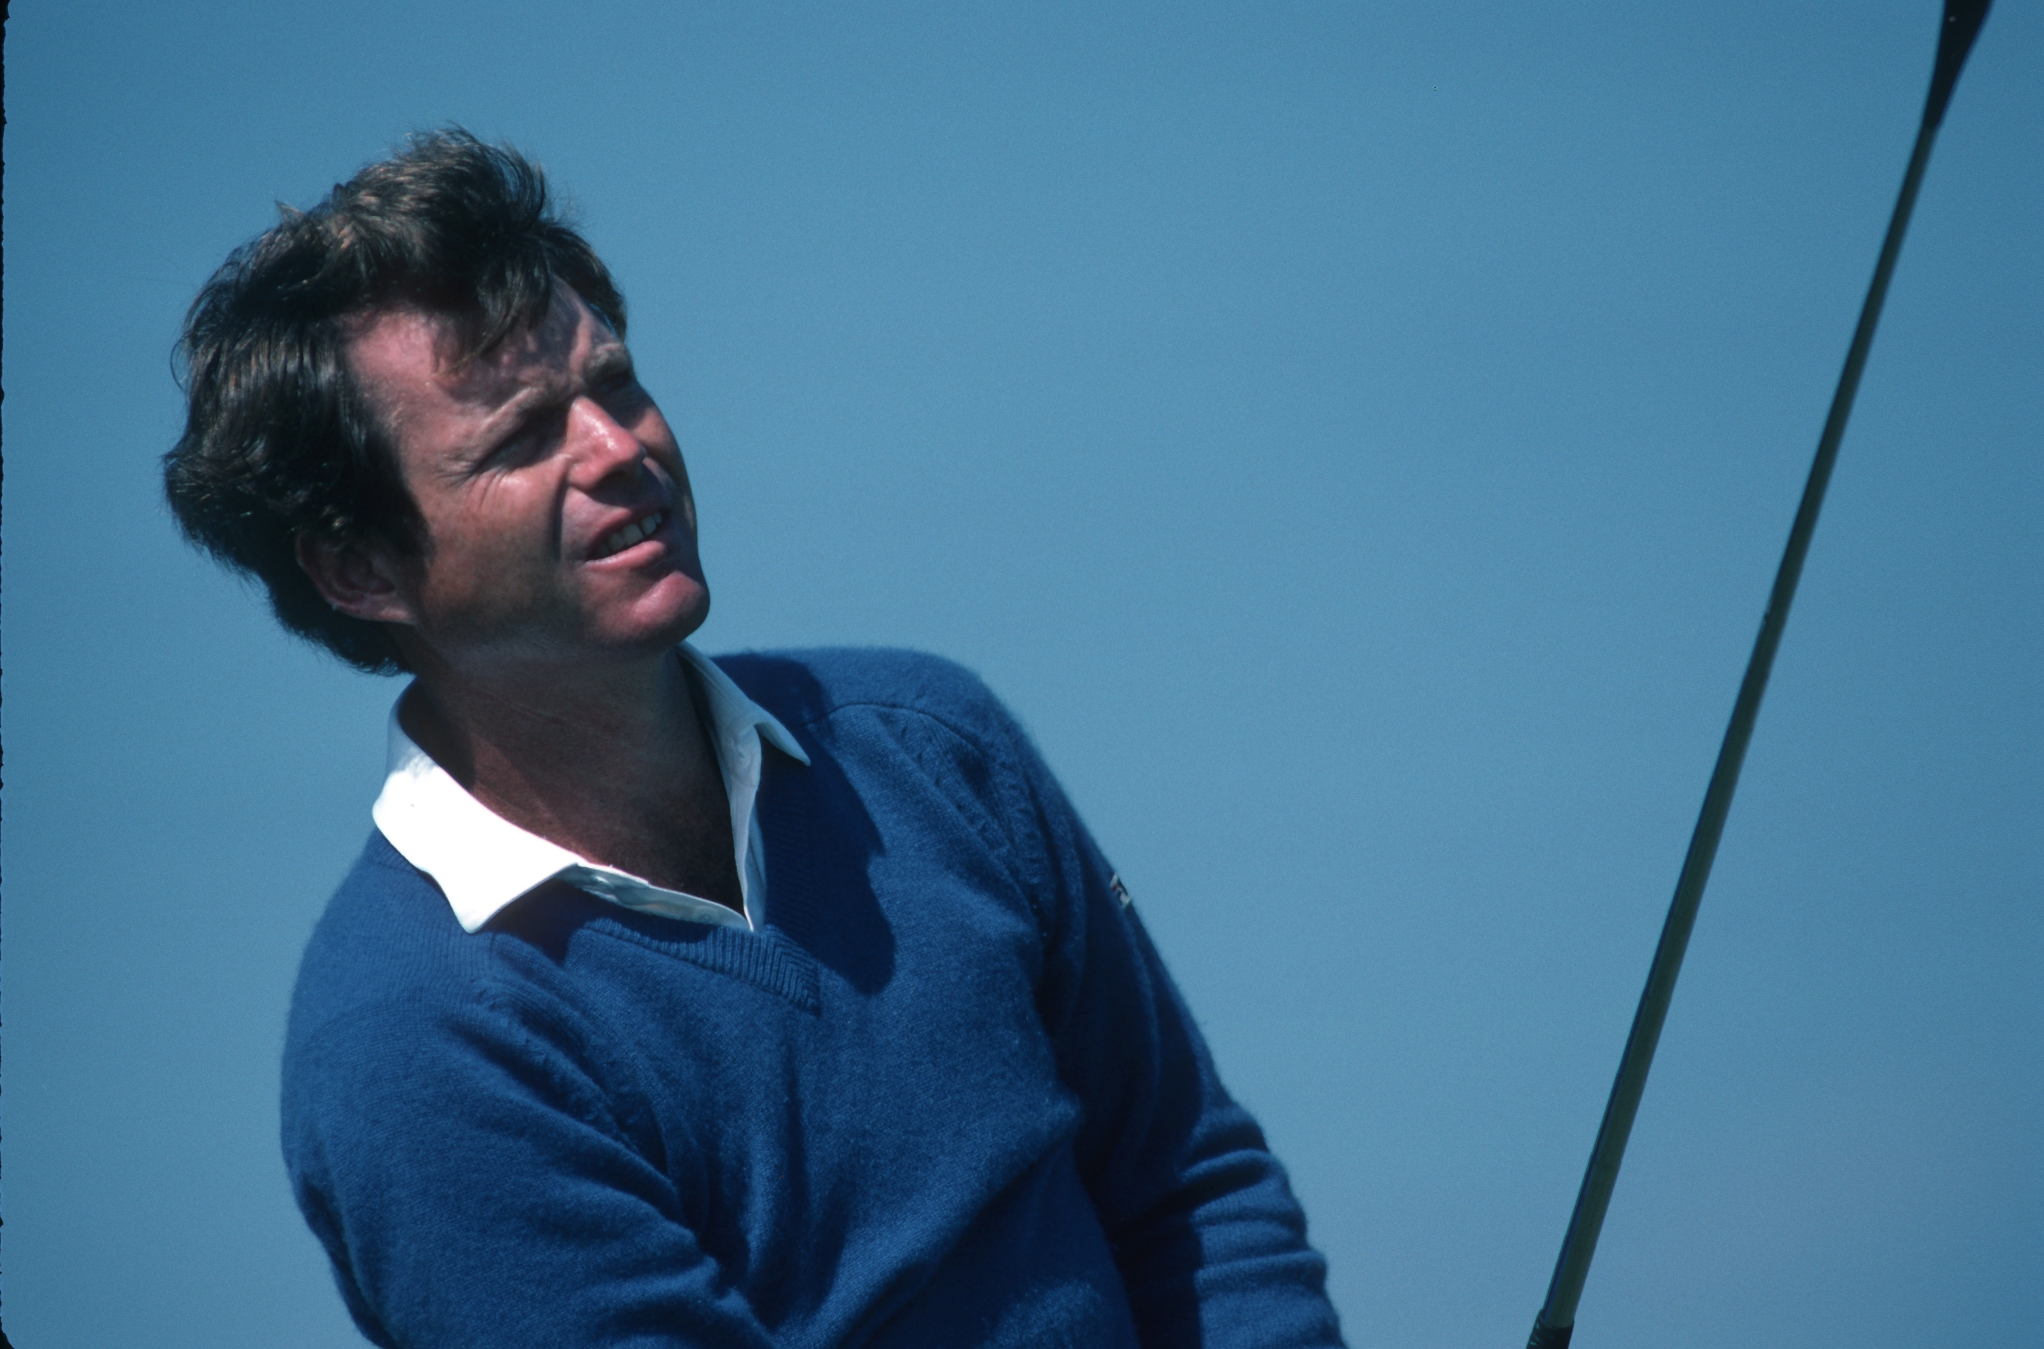 Tom Watson watching his tee closely during the 1984 Open Championship, which many expected him to win